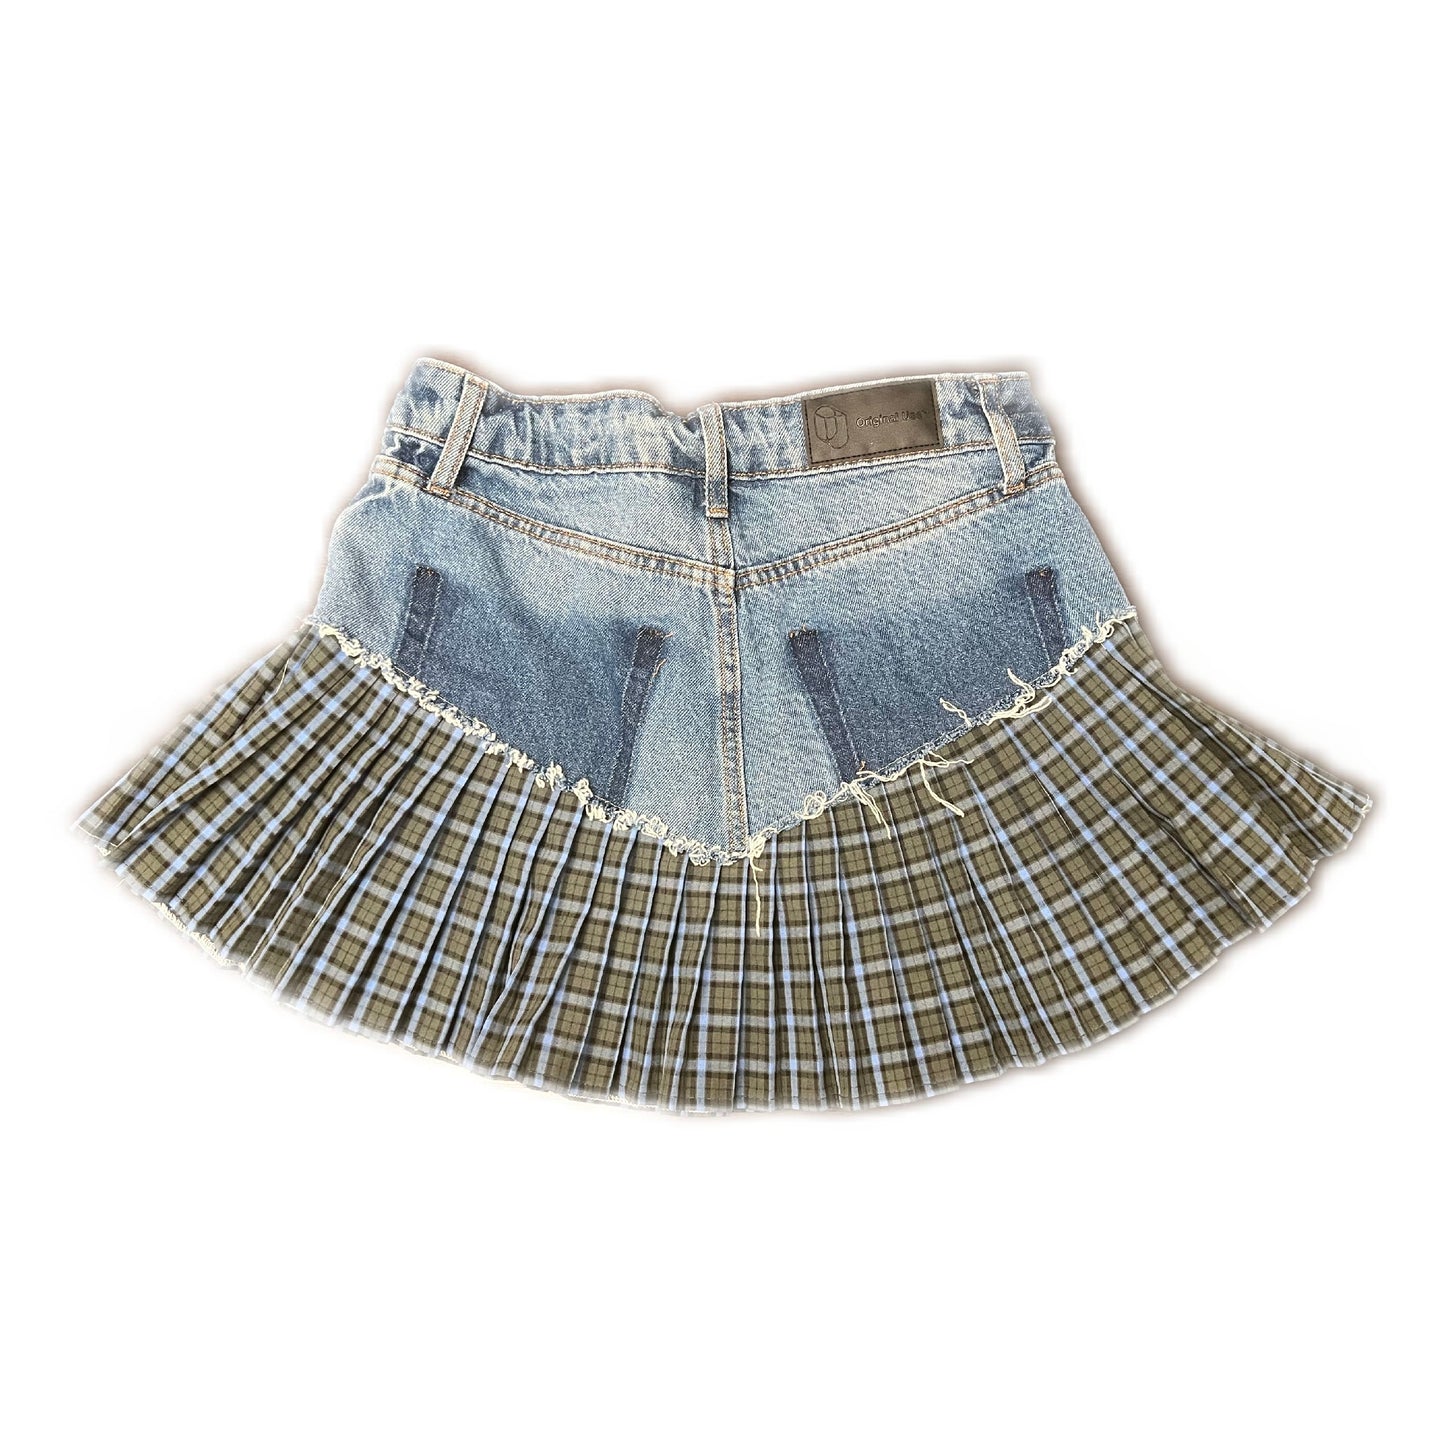 Up-cycled Denim Jean and Plaid Pleated Skirt